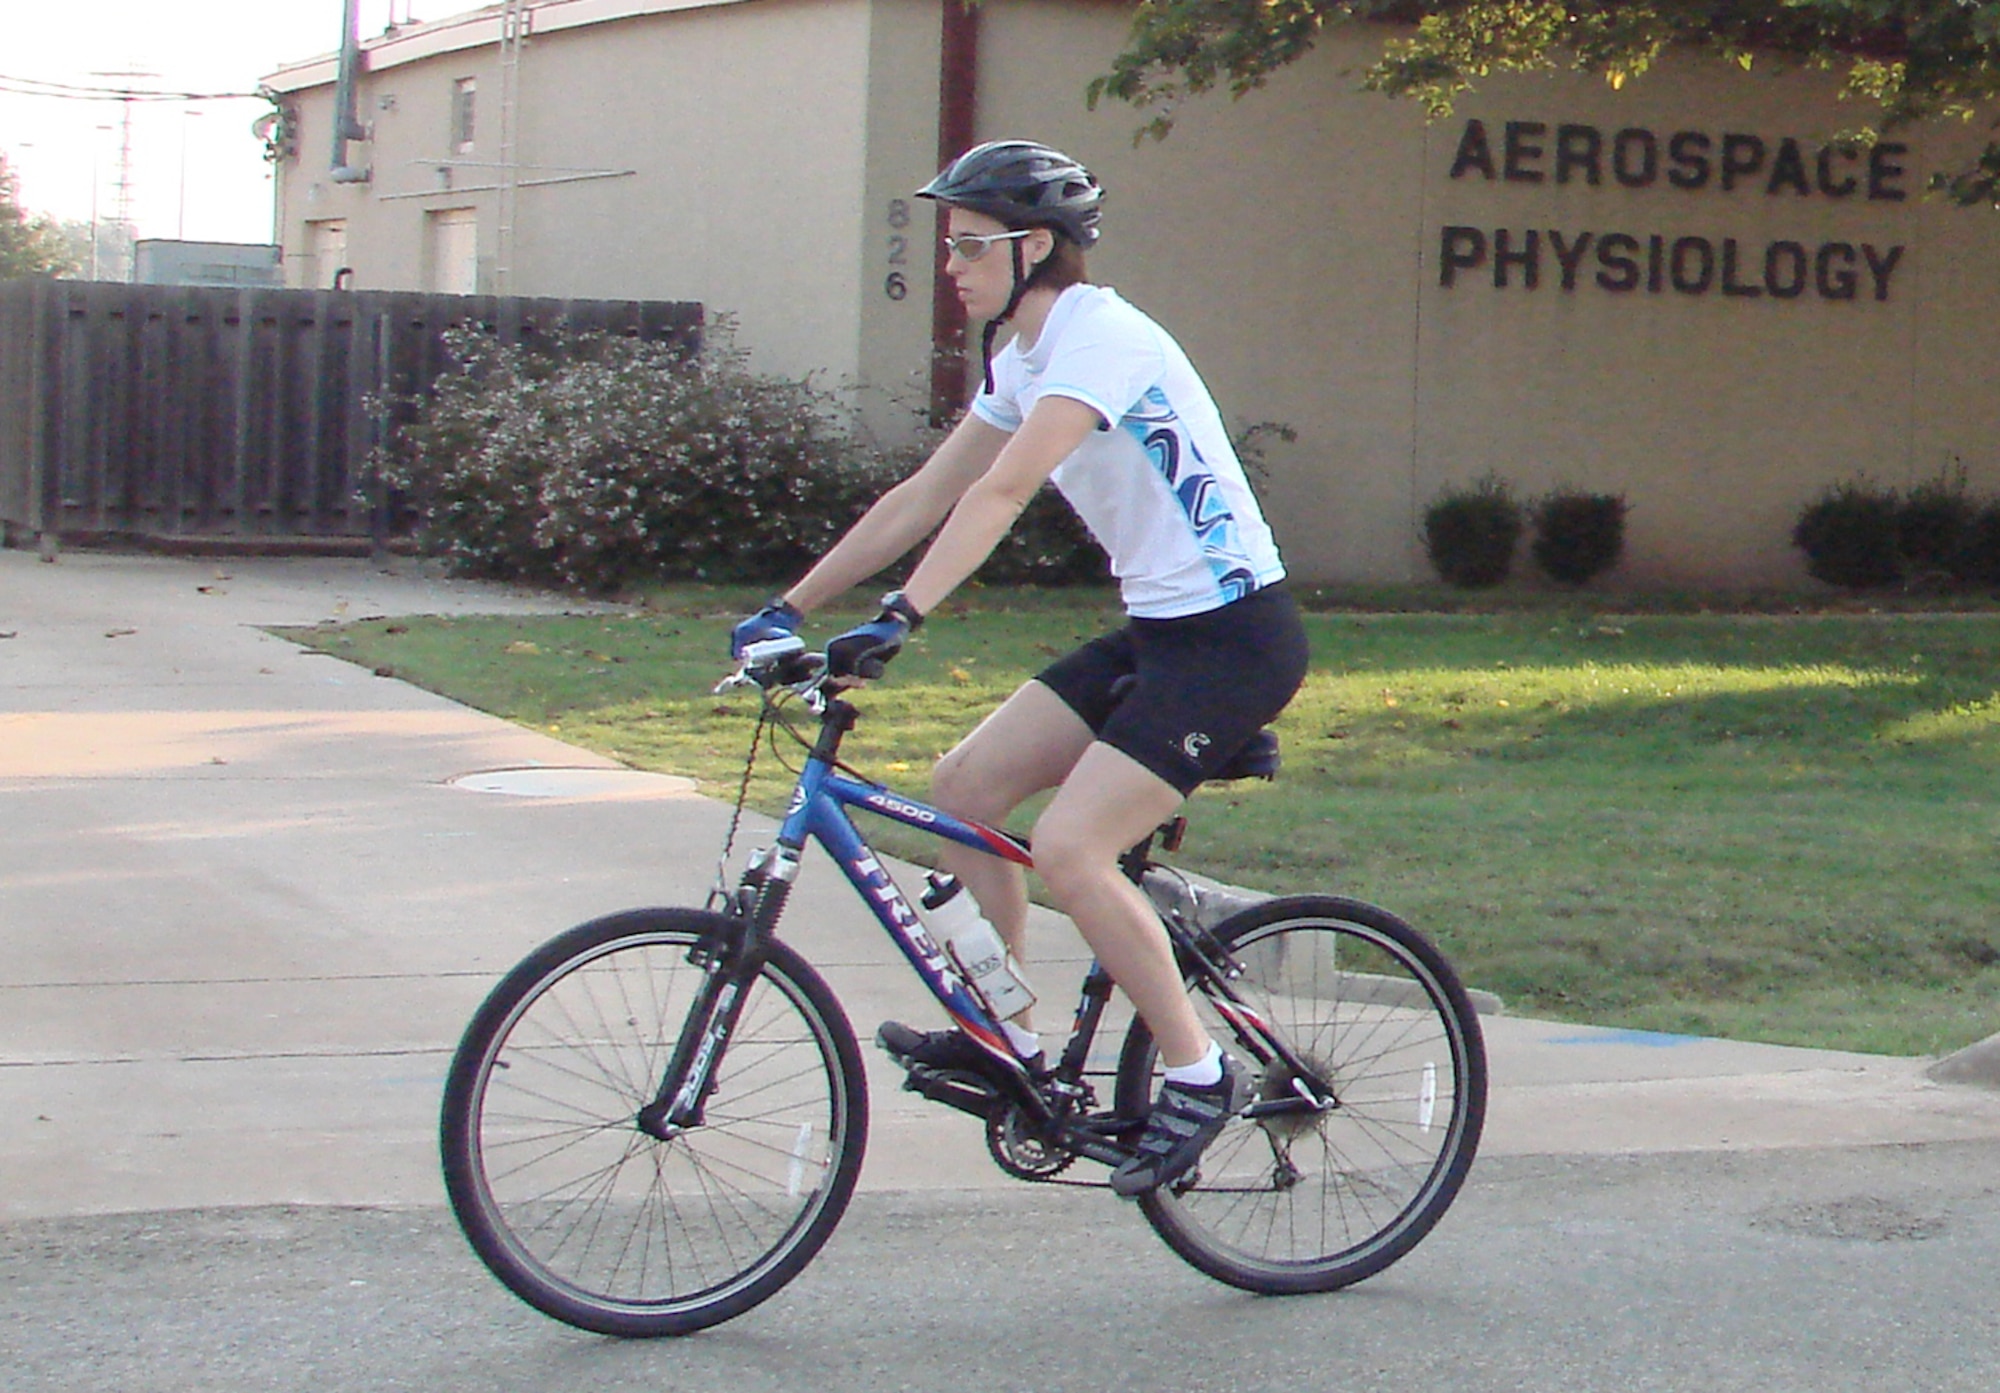 Capt. Joy Schaubhut reflects on her participation in a month-long behavior modification program, in which she put miles on her bicycle instead of her automobile for 30 days. (U.S. Air Force photo by Frank McIntyre)